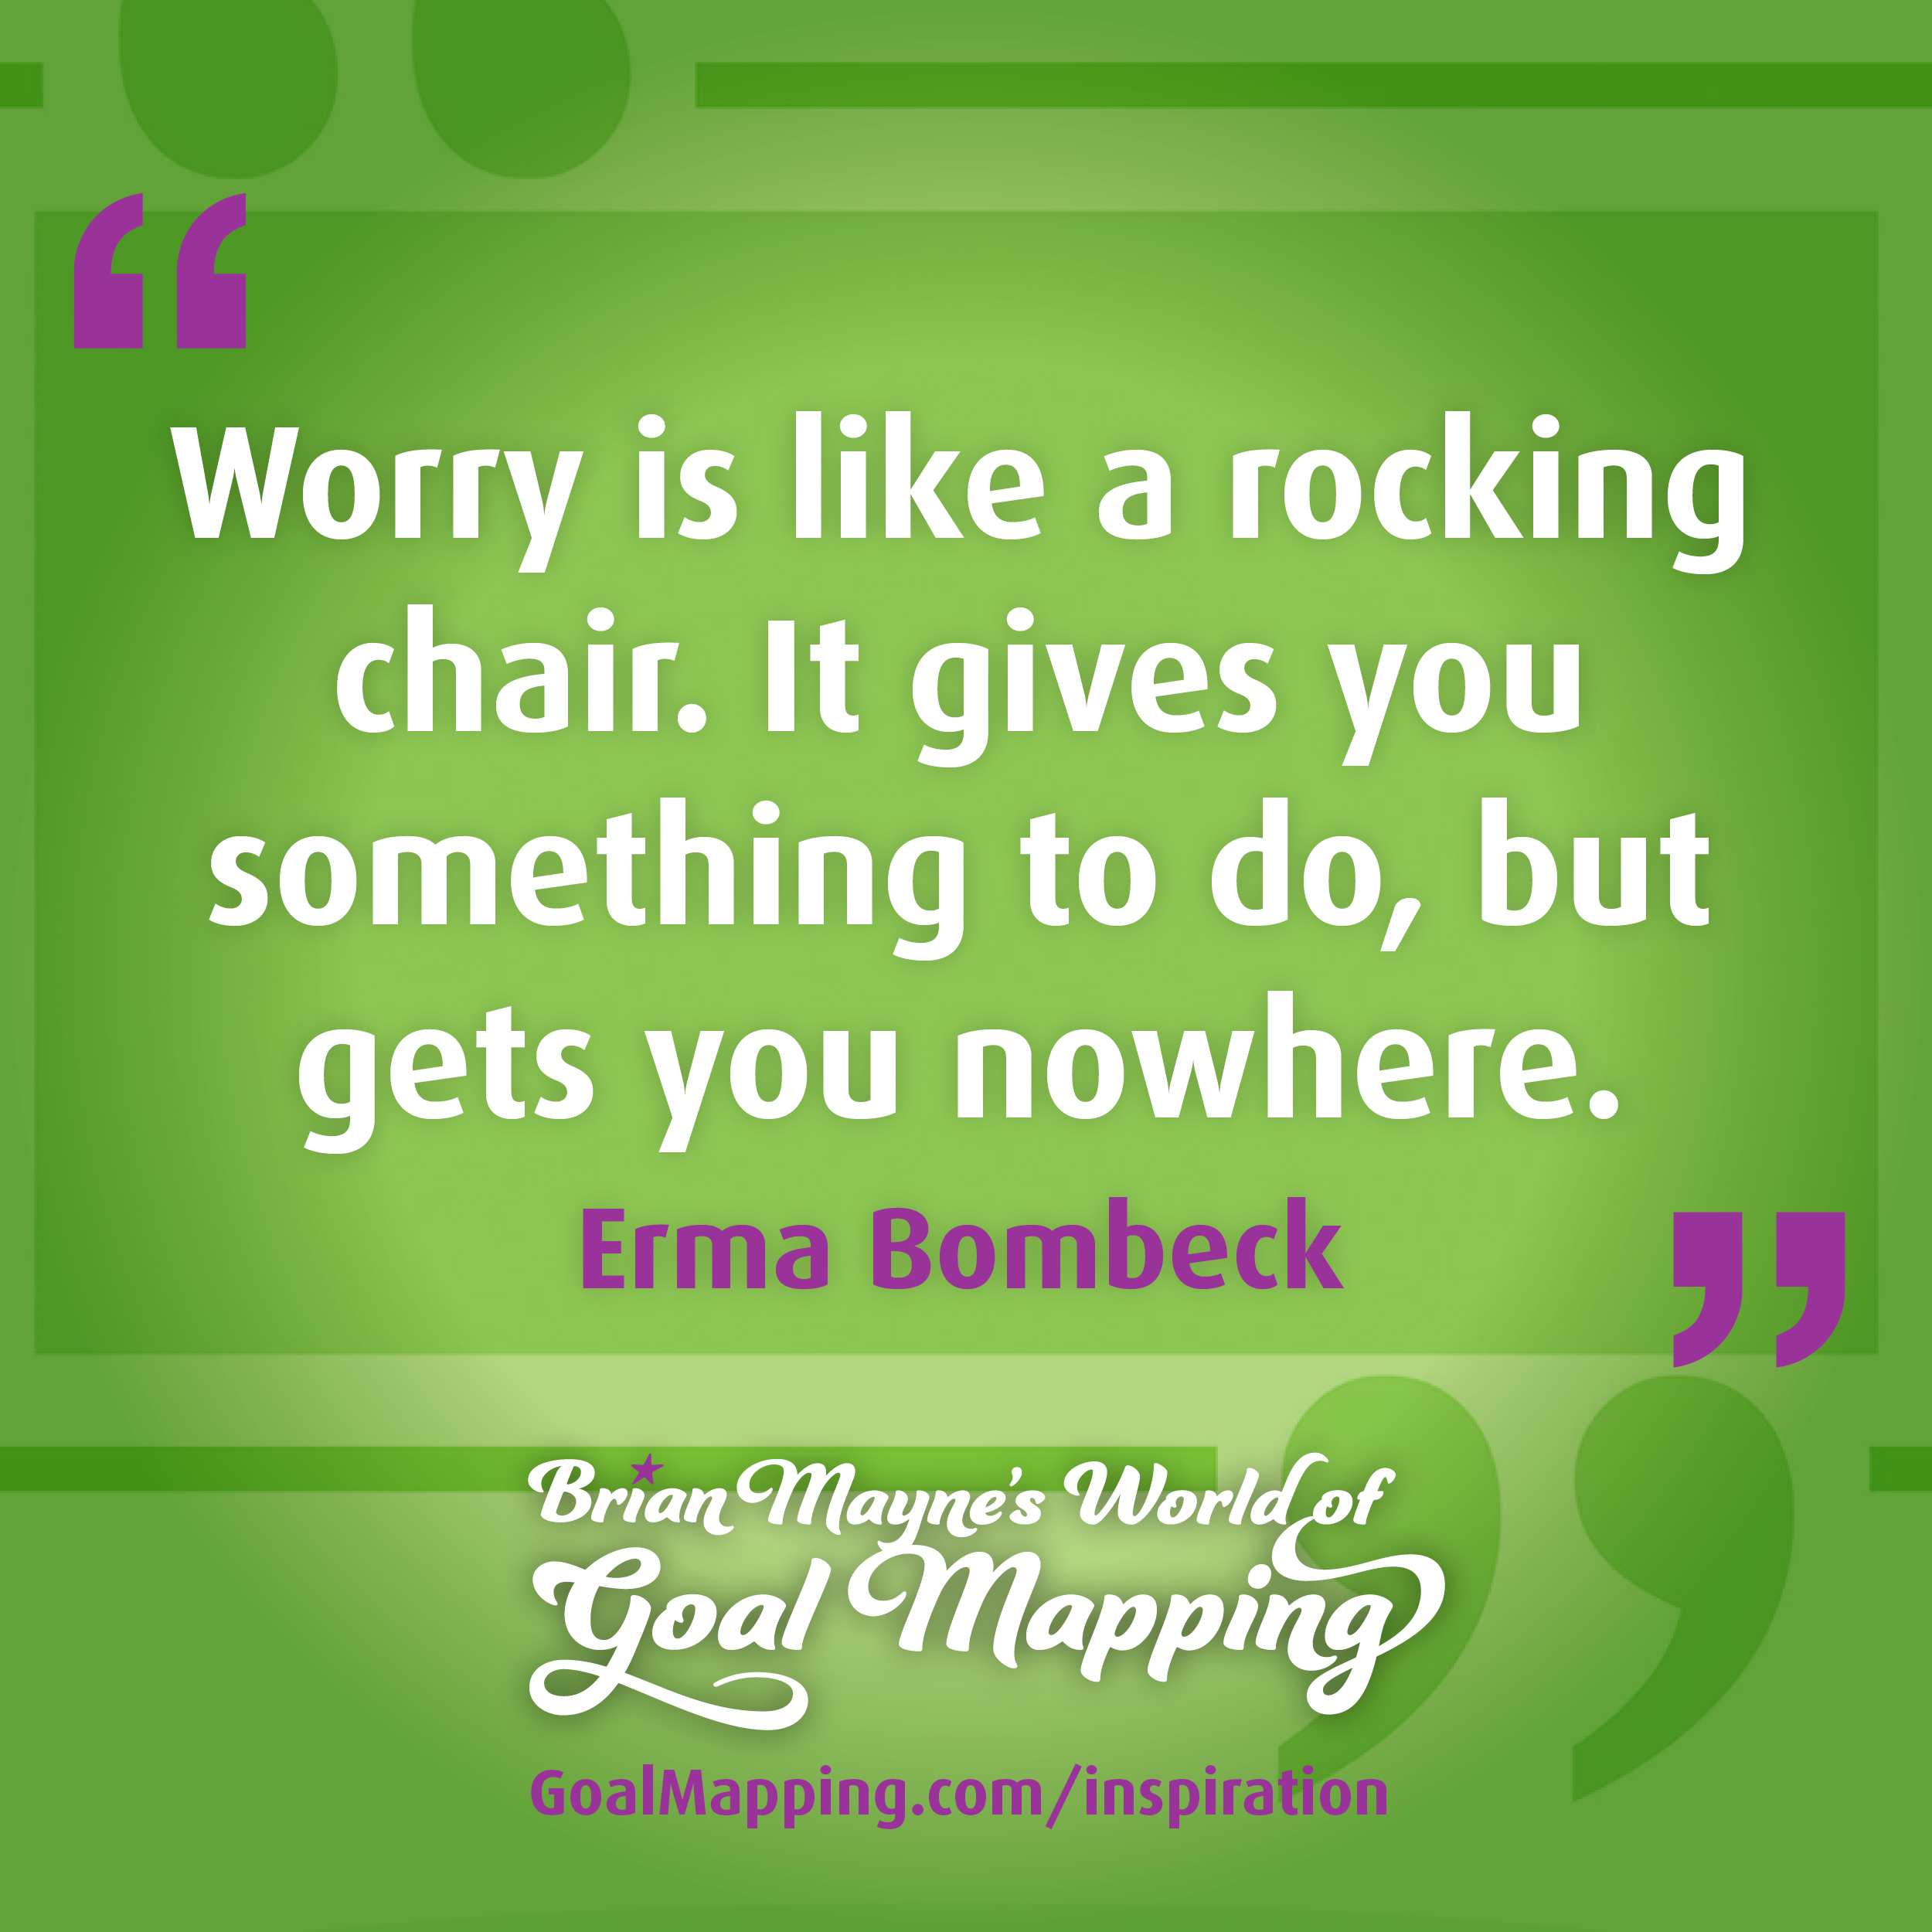 "Worry is like a rocking chair. It gives you something to do, but gets you nowhere." Erma Bombeck